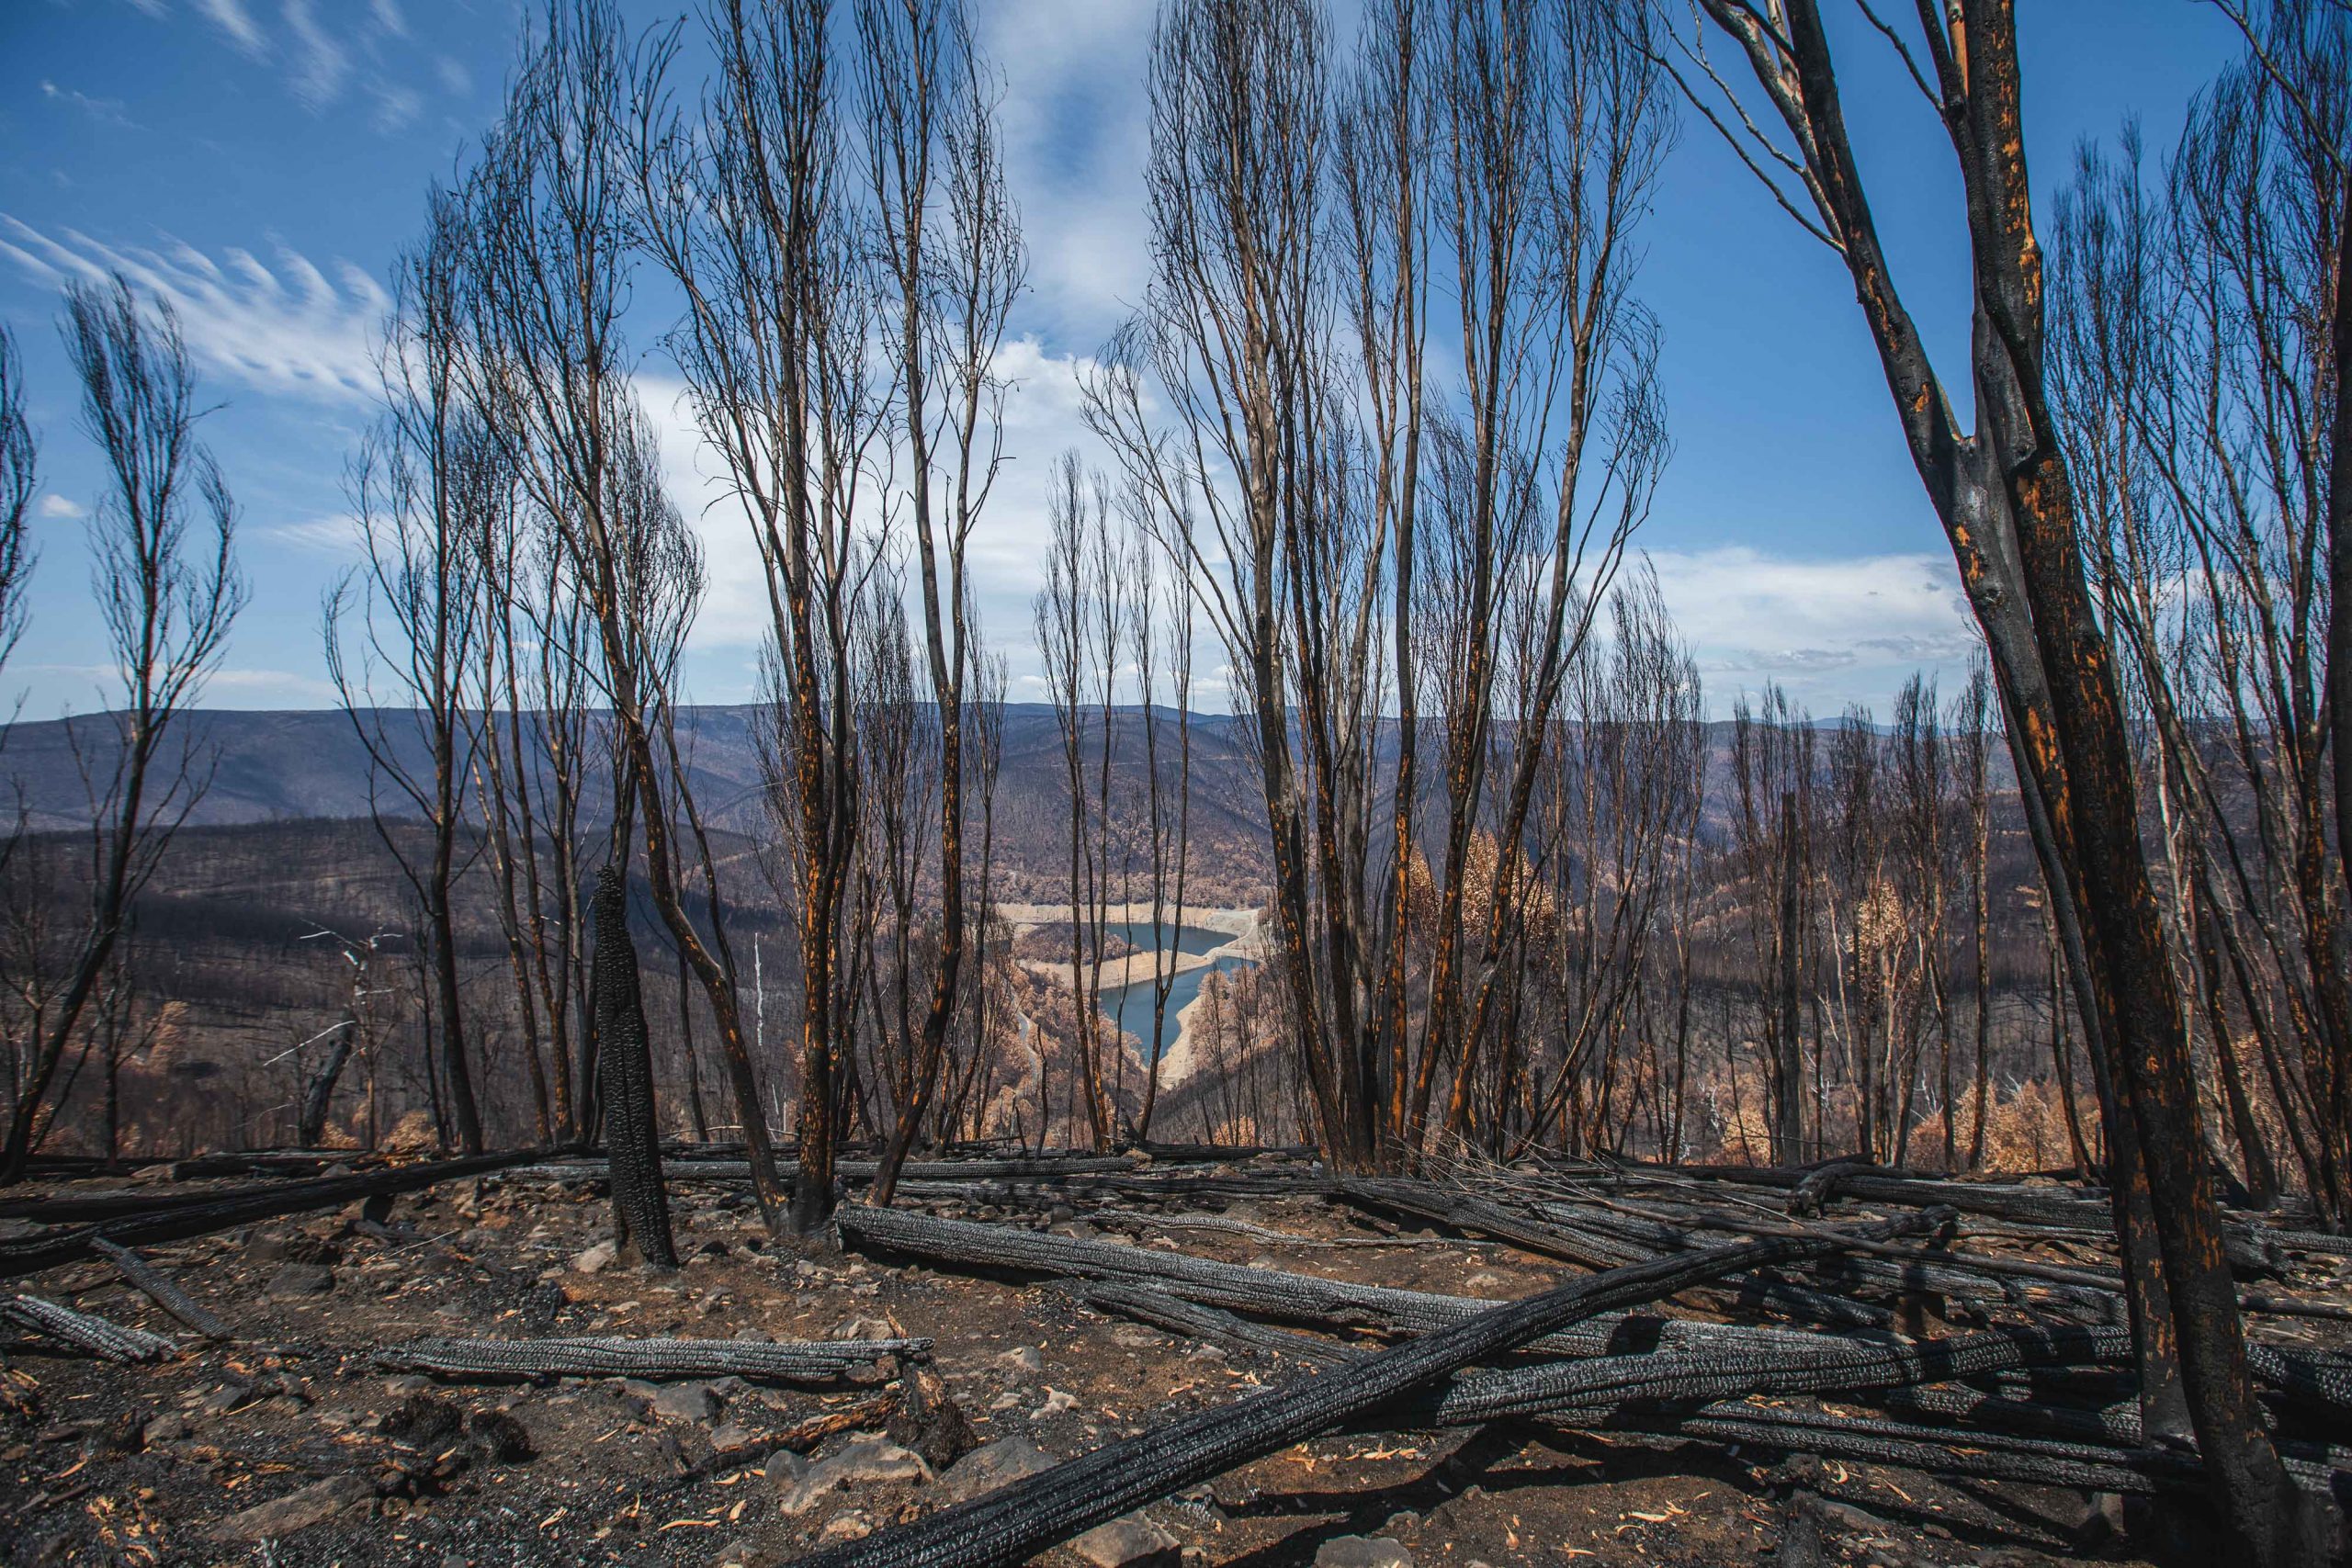 Kosciuszko National Park after the 2019-20 fires. Photo credit: Alex Pike/DPIE